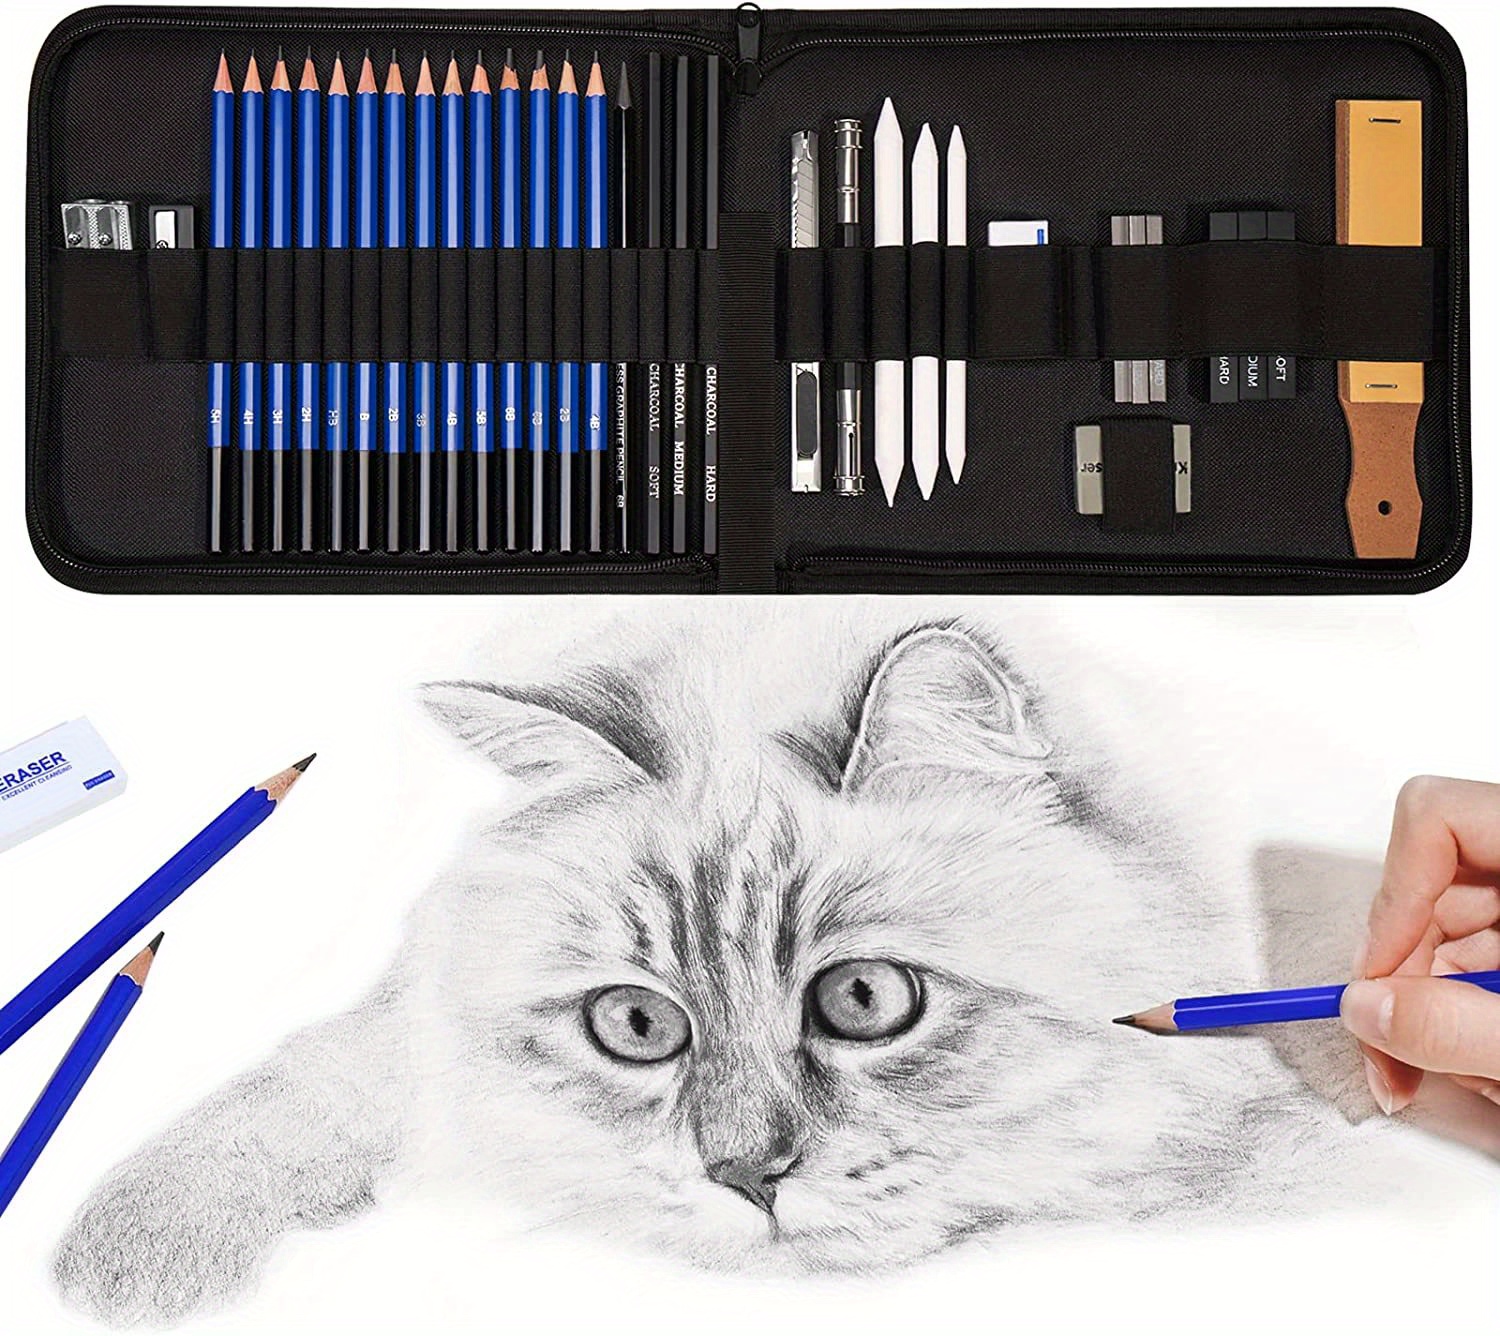 33 Pieces Pro Drawing Kit Sketching Pencils Set,Portable Zippered Travel  Case